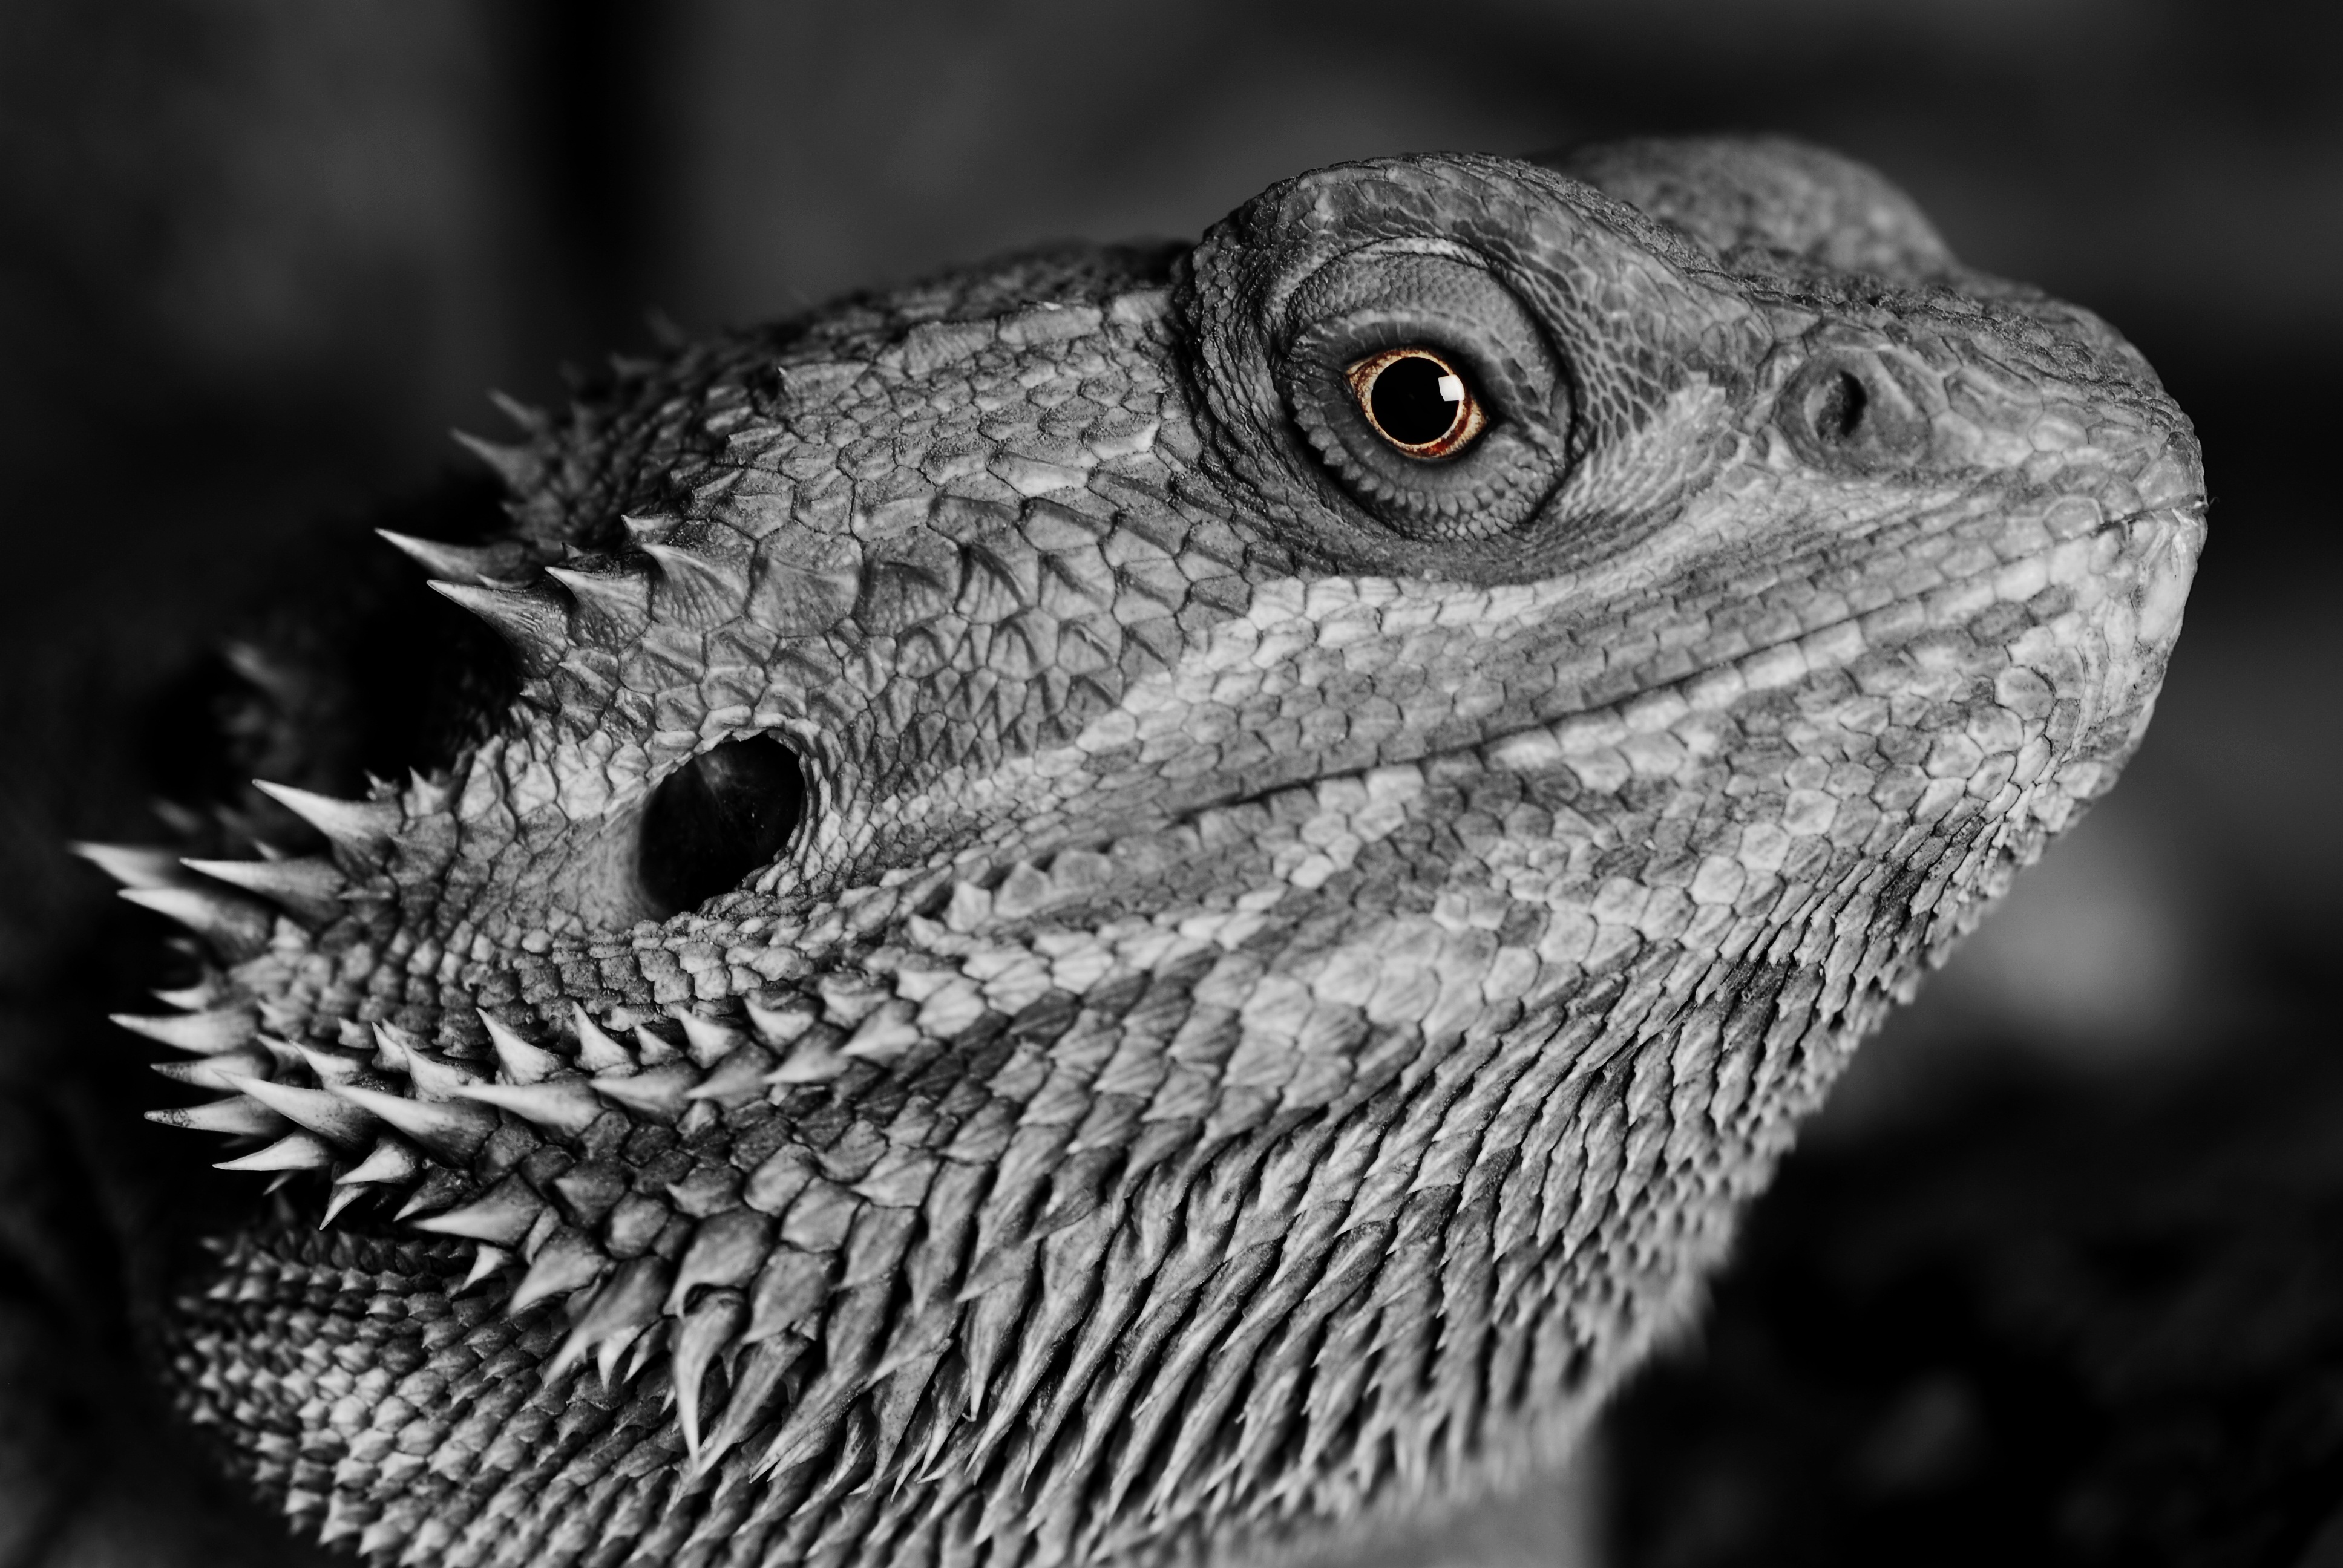 Wallpapers lizard monochrome black and white on the desktop